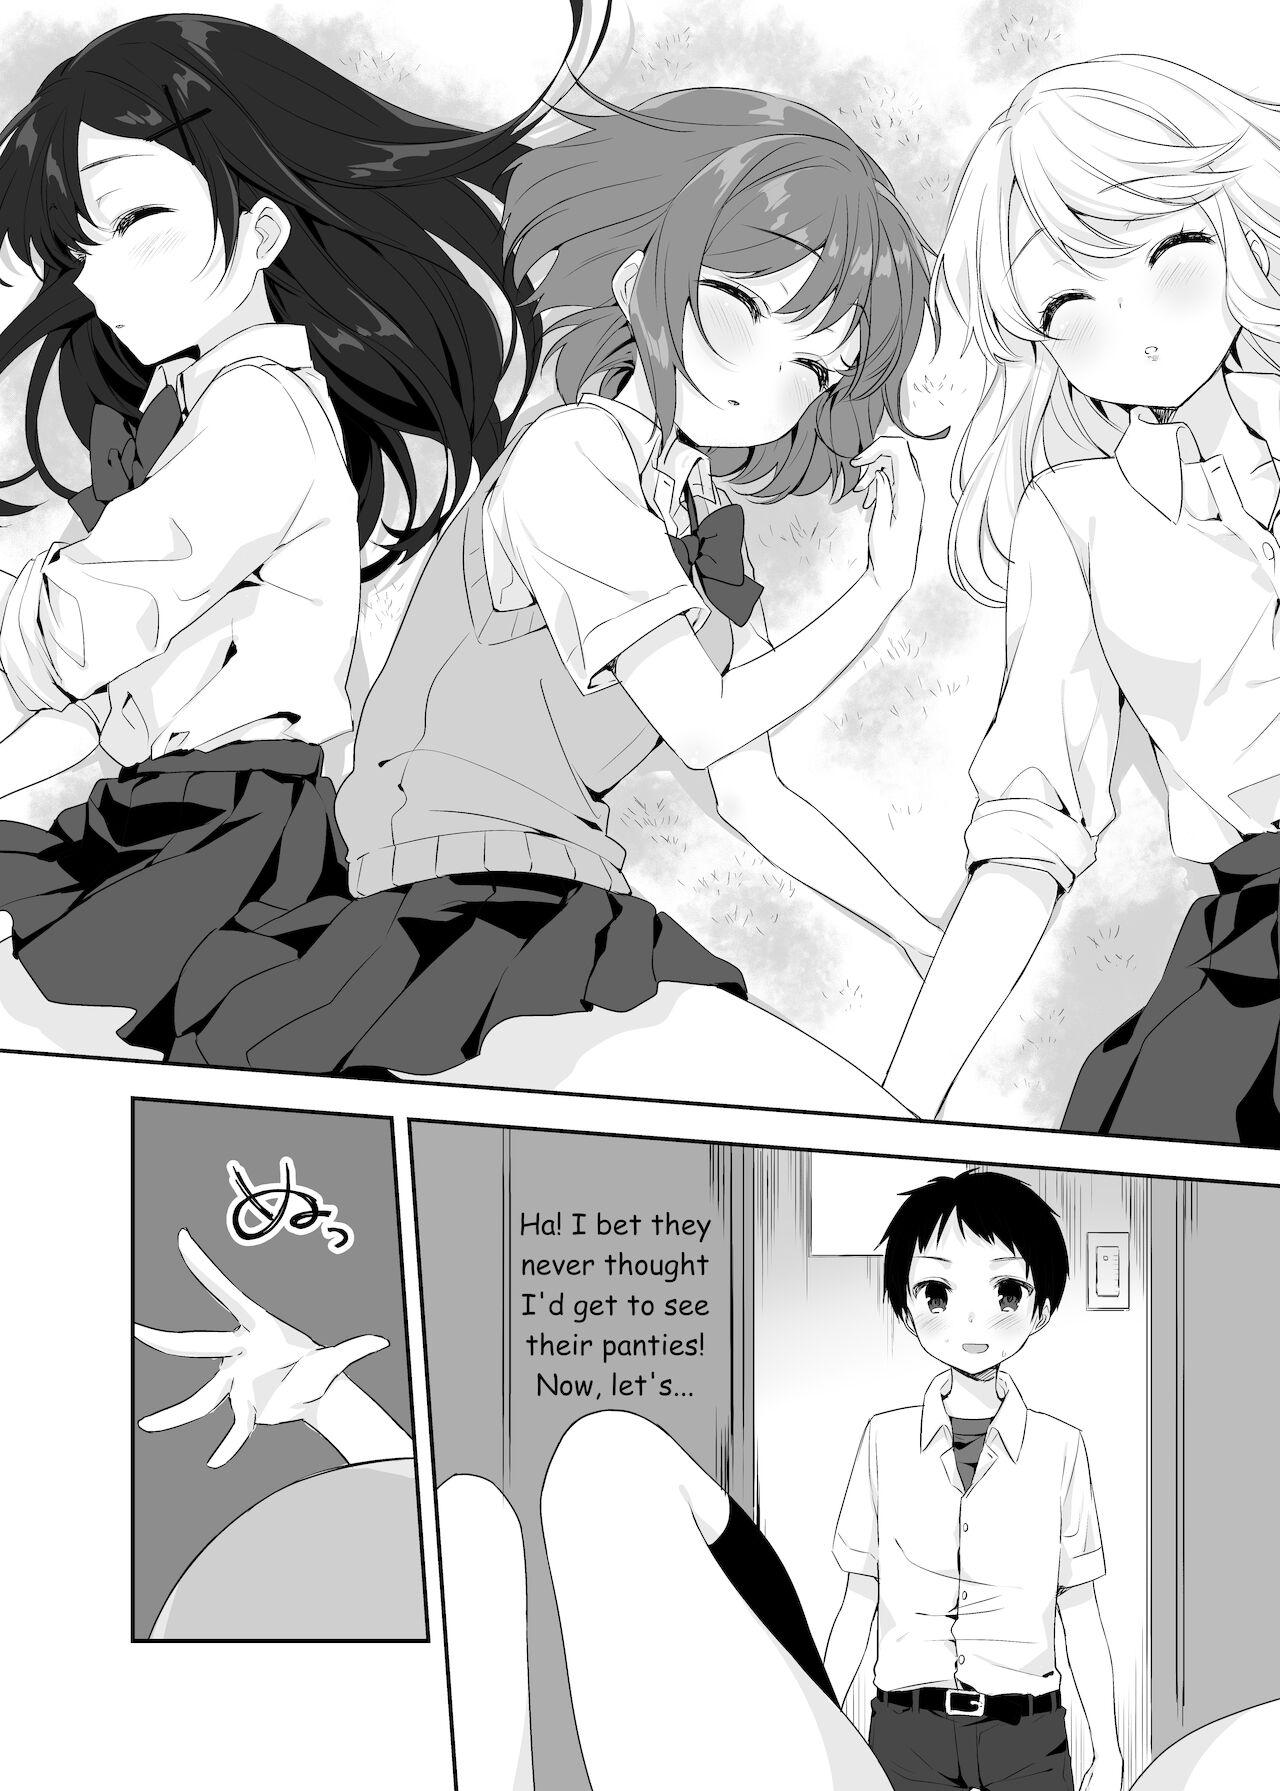 Boku no Onee-chan to Tomodachi wo Nemurasete Osottemitara Kaeriuchi ni Atta | The Tables were Turned when I tried to Rape my Sister and her Friends while they were Asleep 7